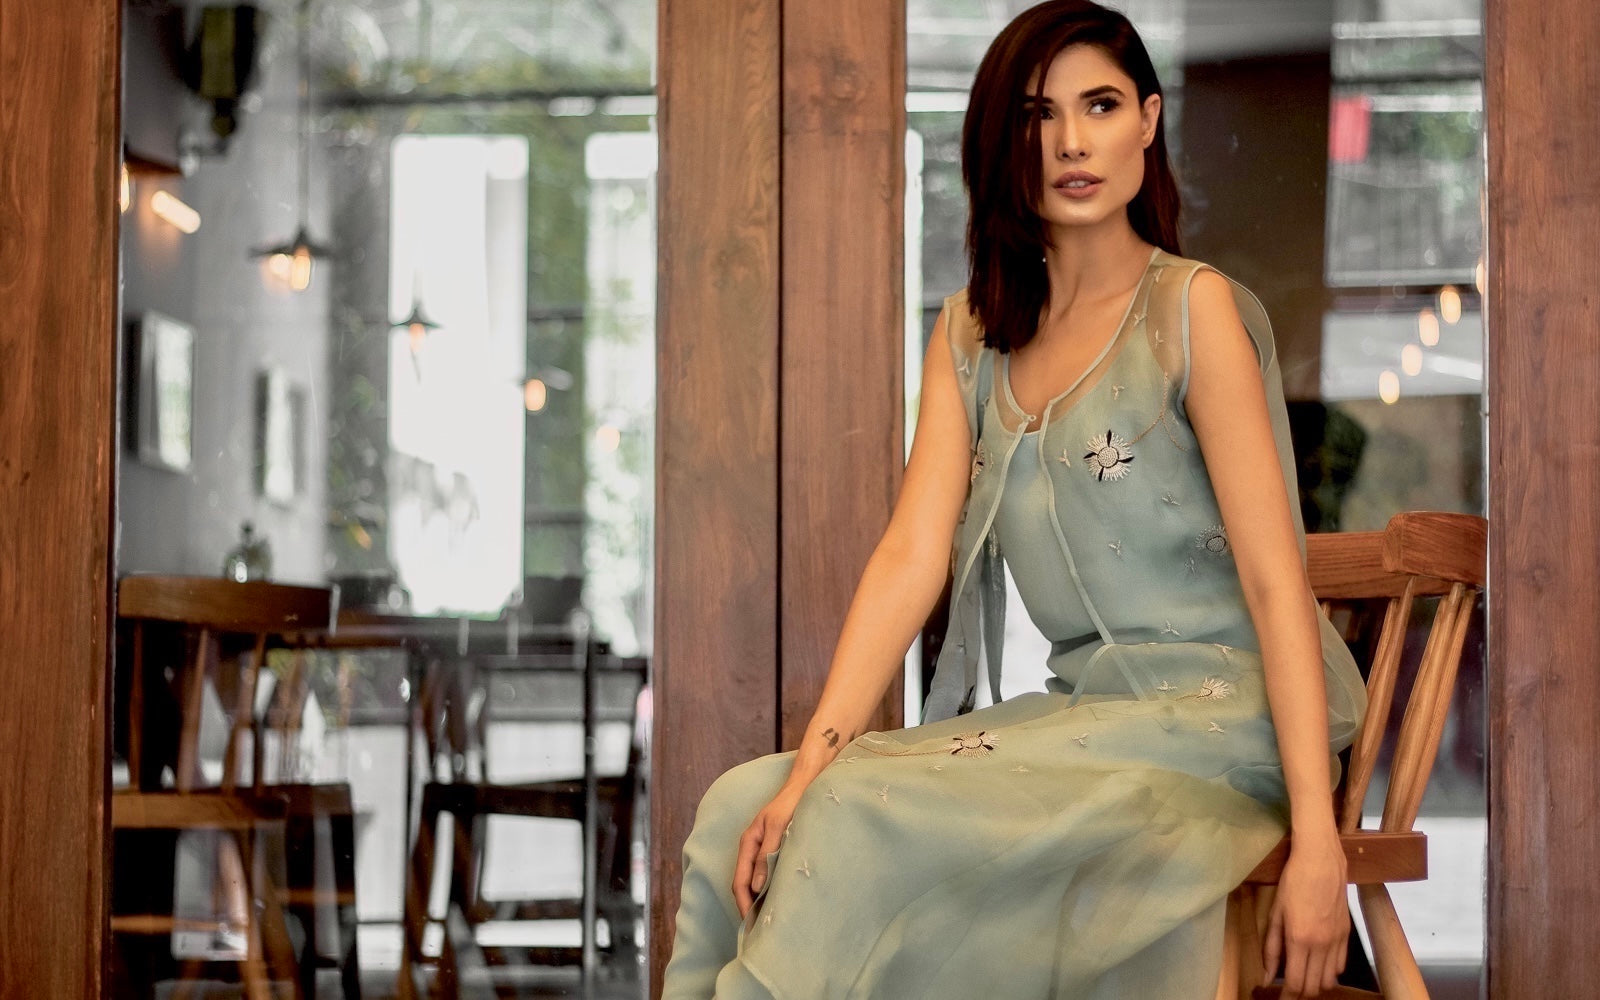 Jasmine Bains launches a beautifully classic Indian Kurta Jacket Dress set in sage green colour, The outer gilet / jacket is stitched in a sheer silk organza fabric that exudes light and weightless elegance into the garment. Accompanied with an inner slip